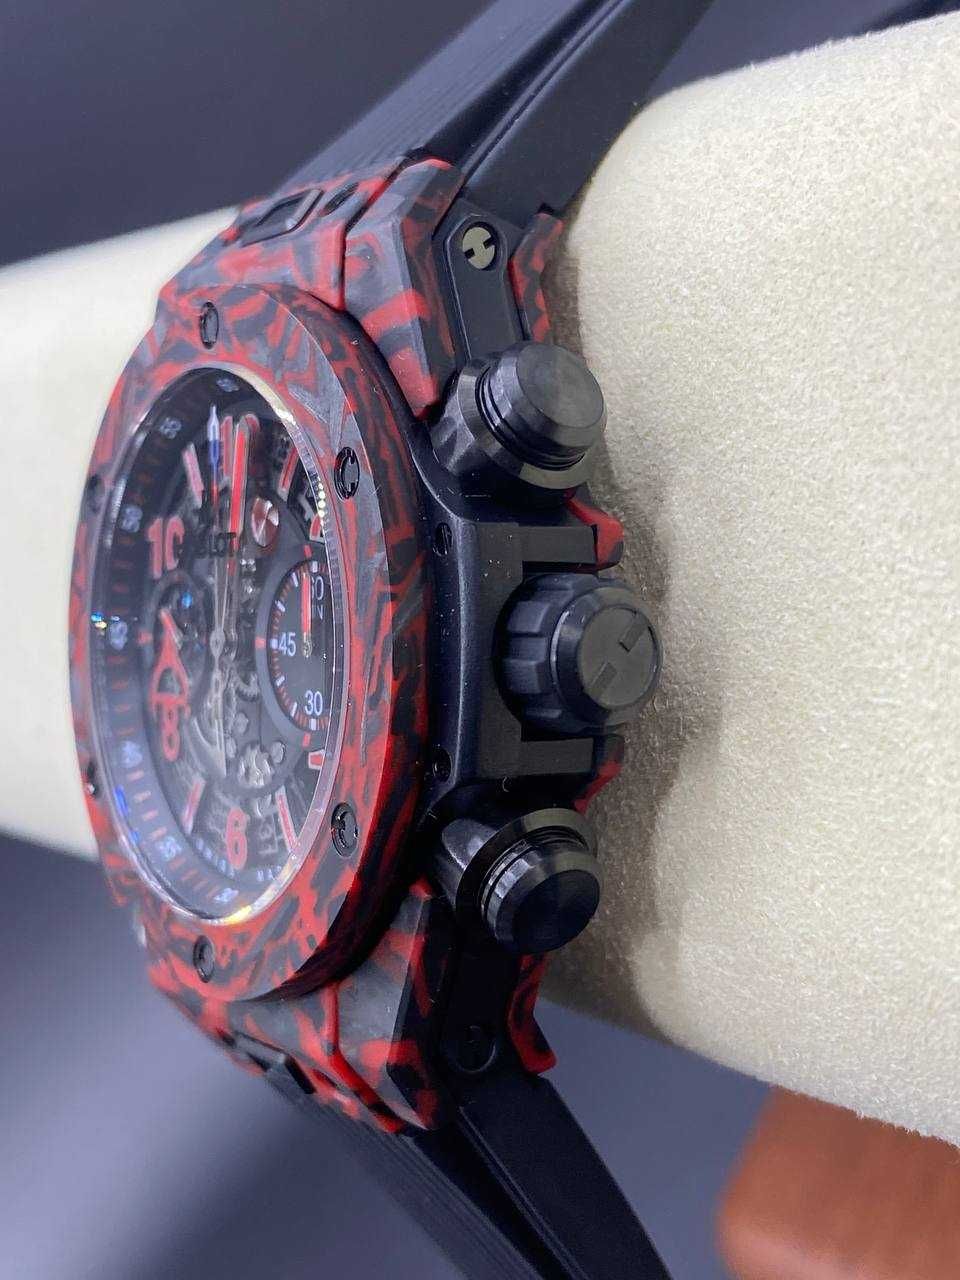 H-blot Big Bang Unico Red Carbon Alex Ovechkin Limited Edition